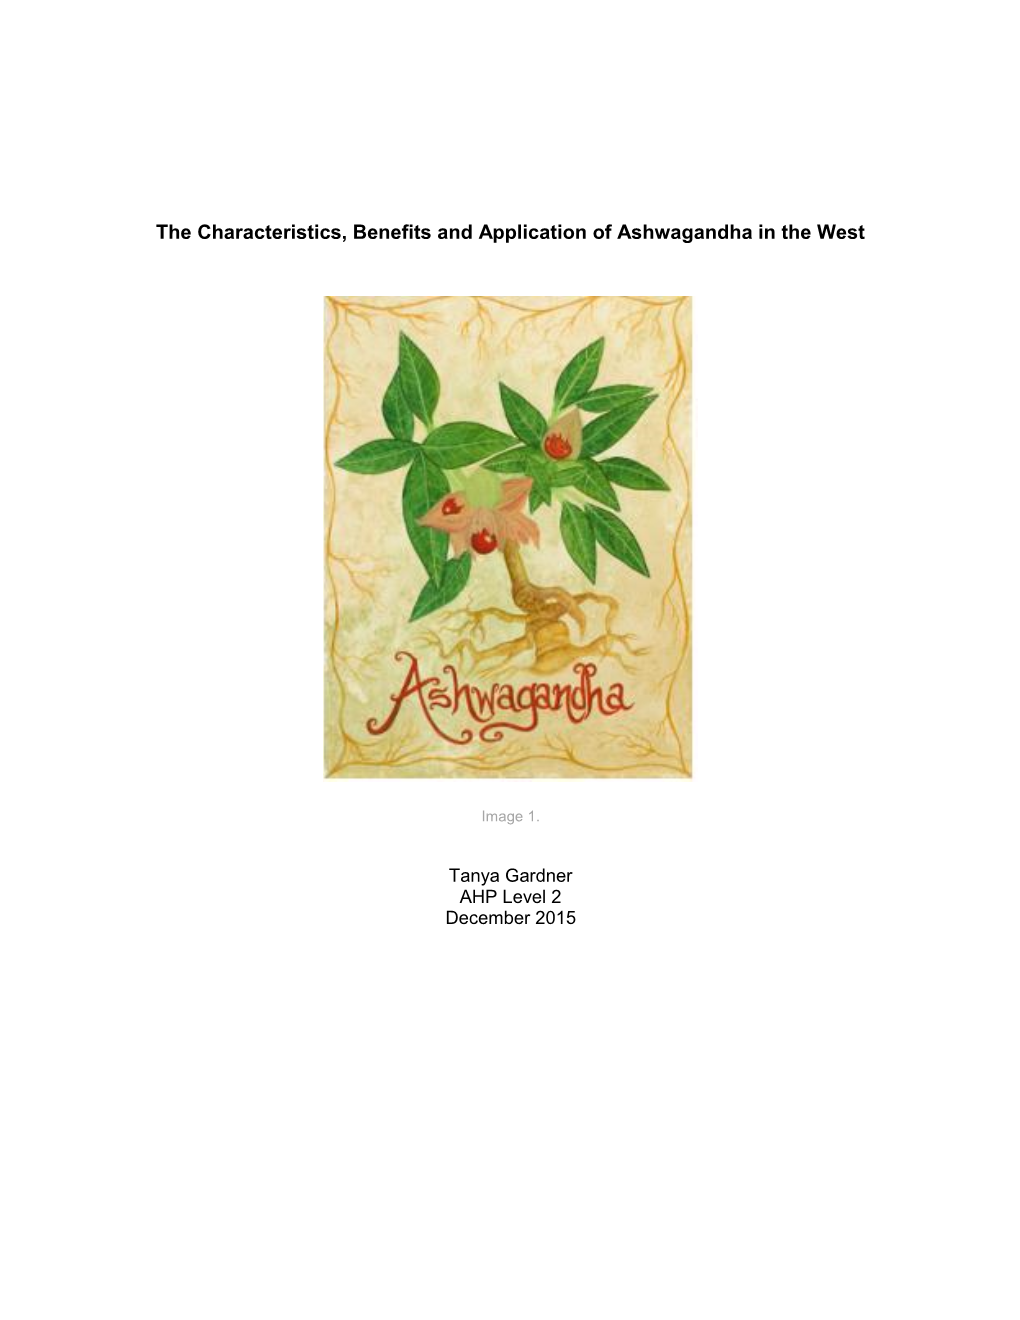 The Characteristics, Benefits and Application of Ashwagandha in the West